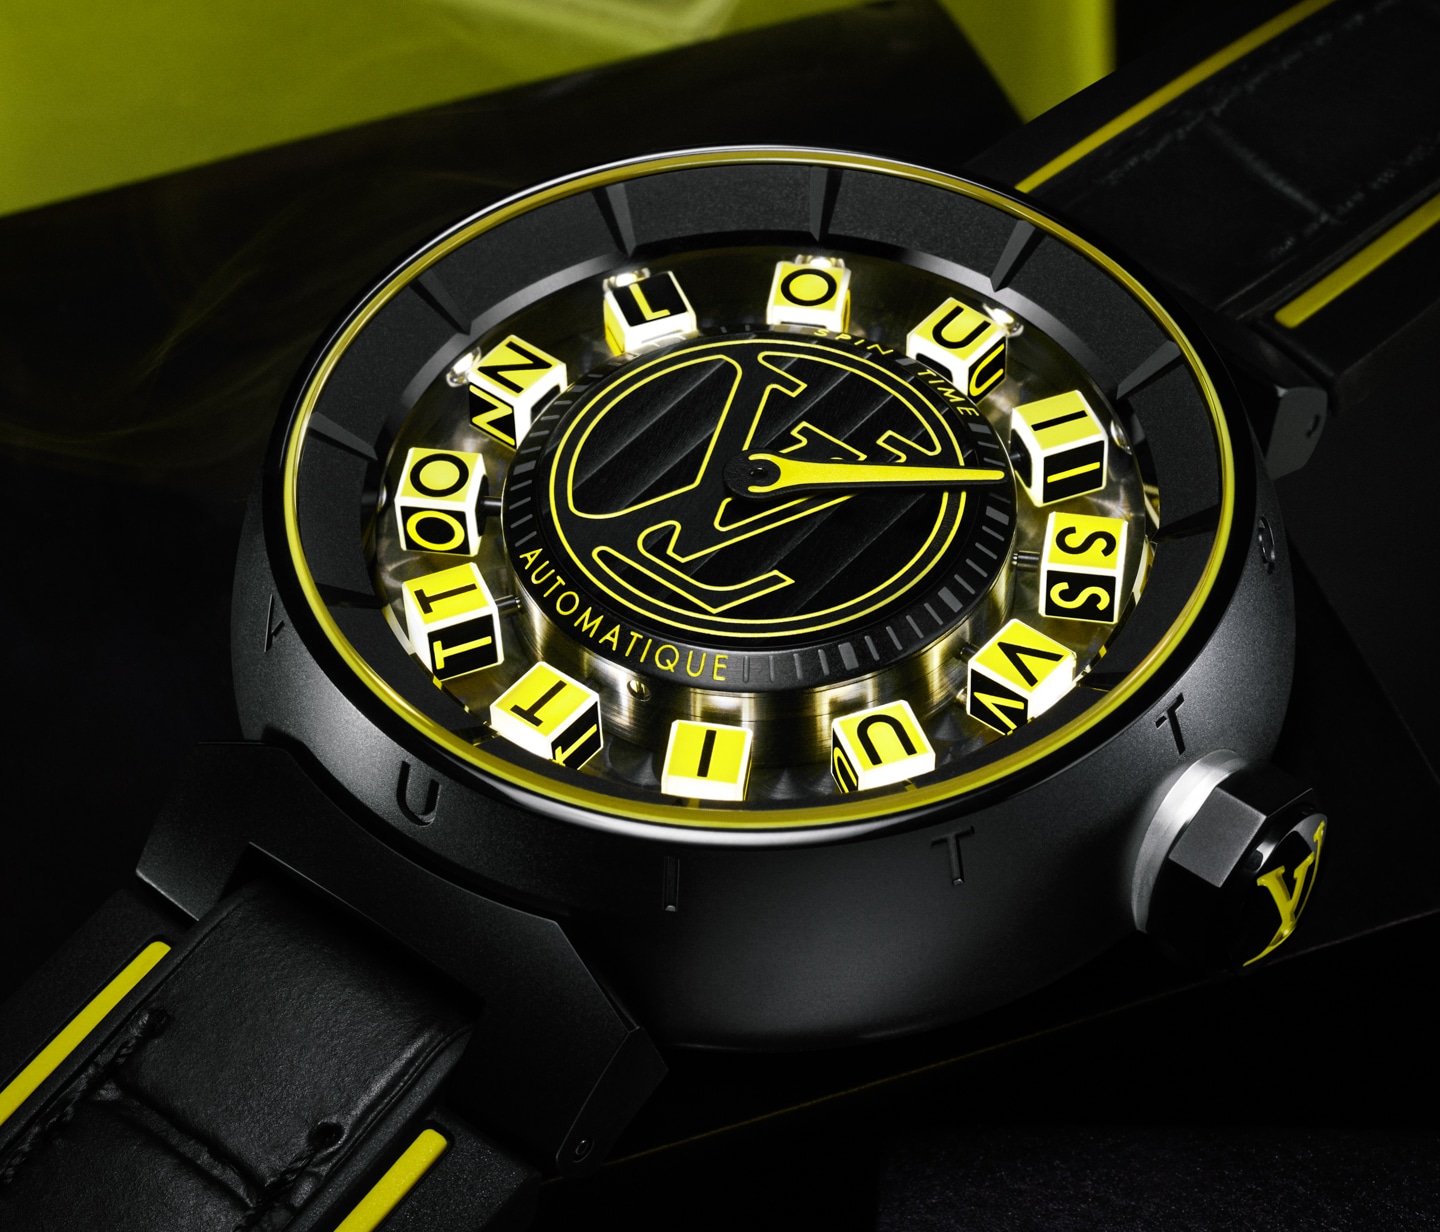 Louis Vuitton 10th anniversary Tambour watches